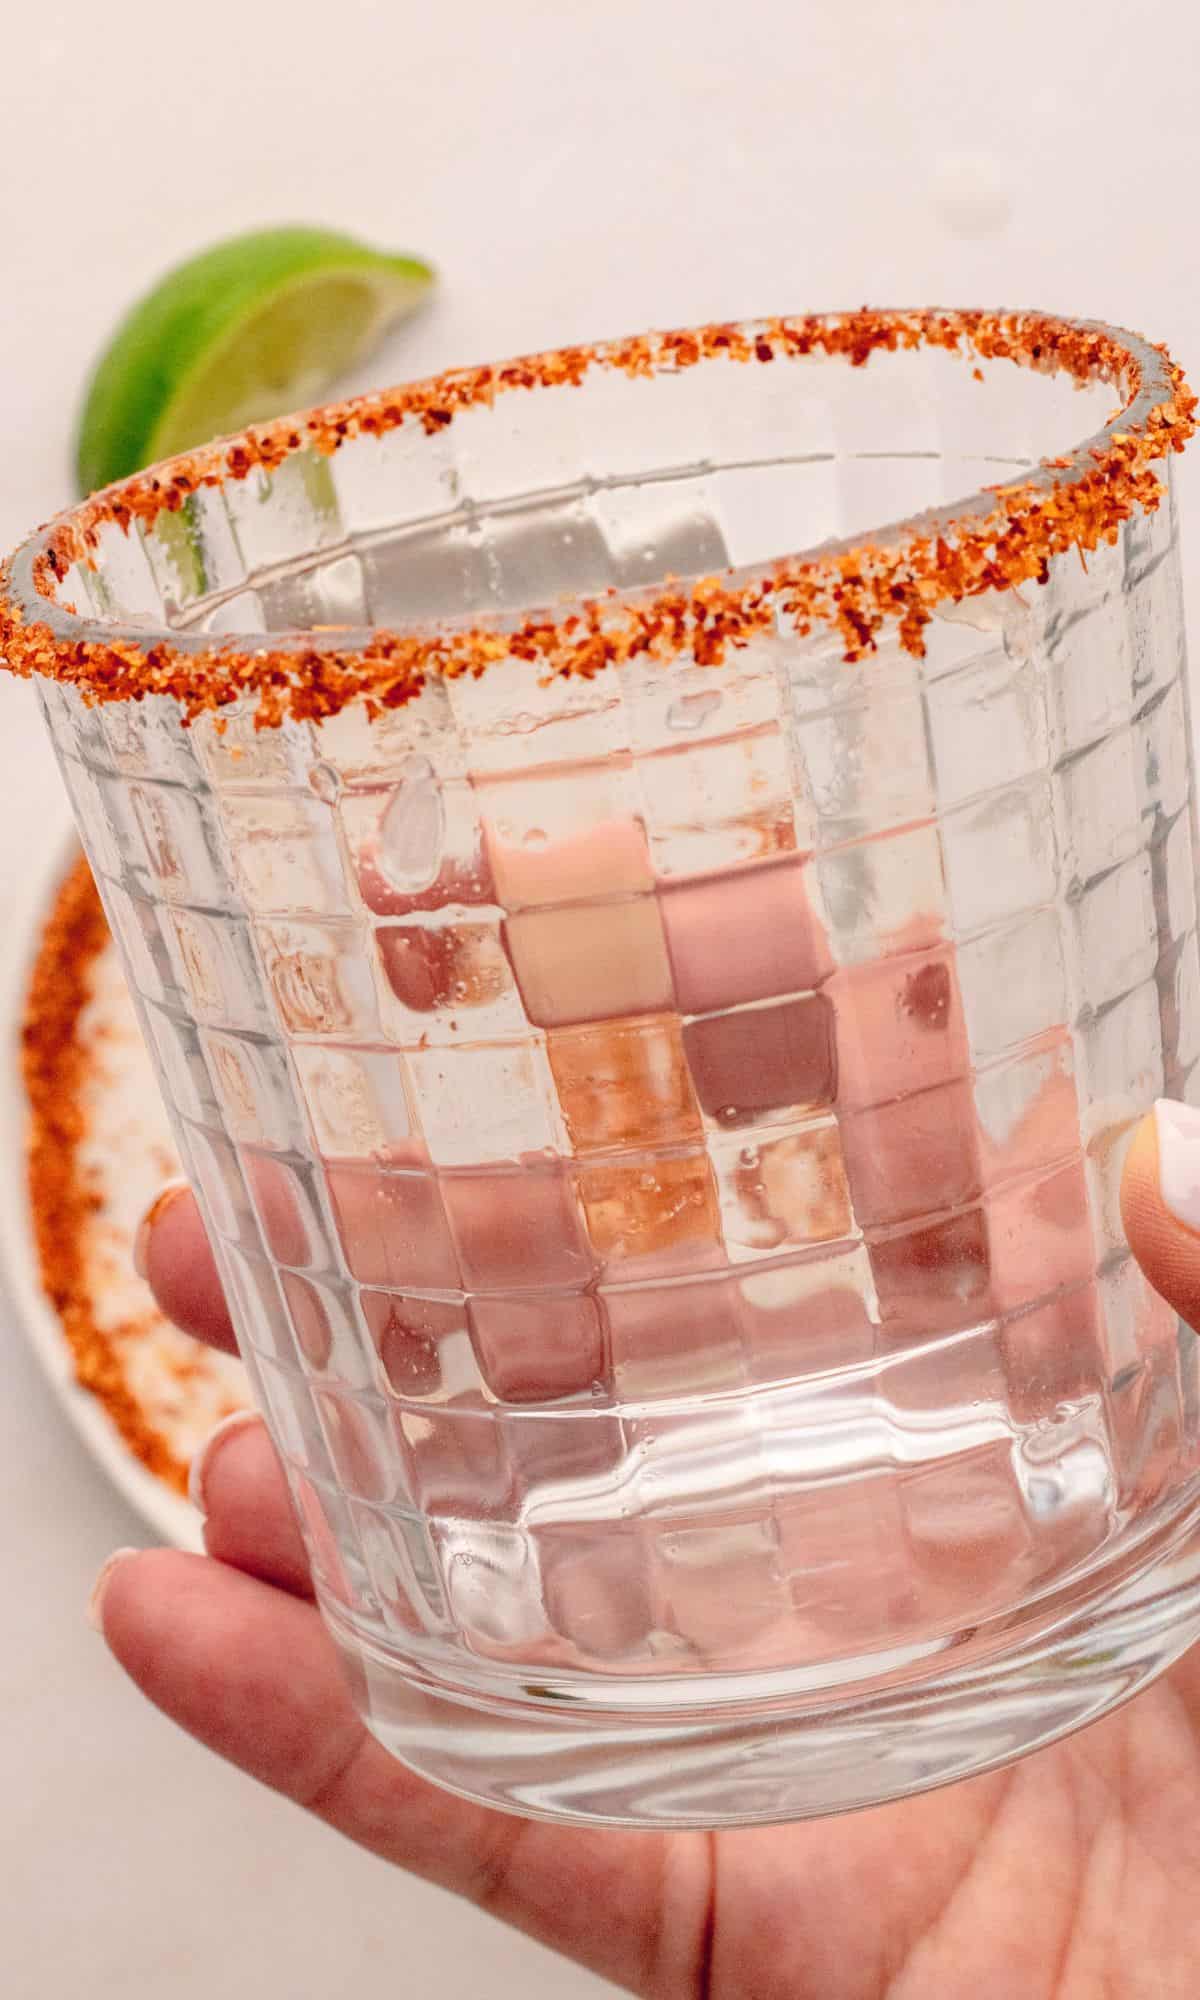 A glass lined with chili lime seasoning.